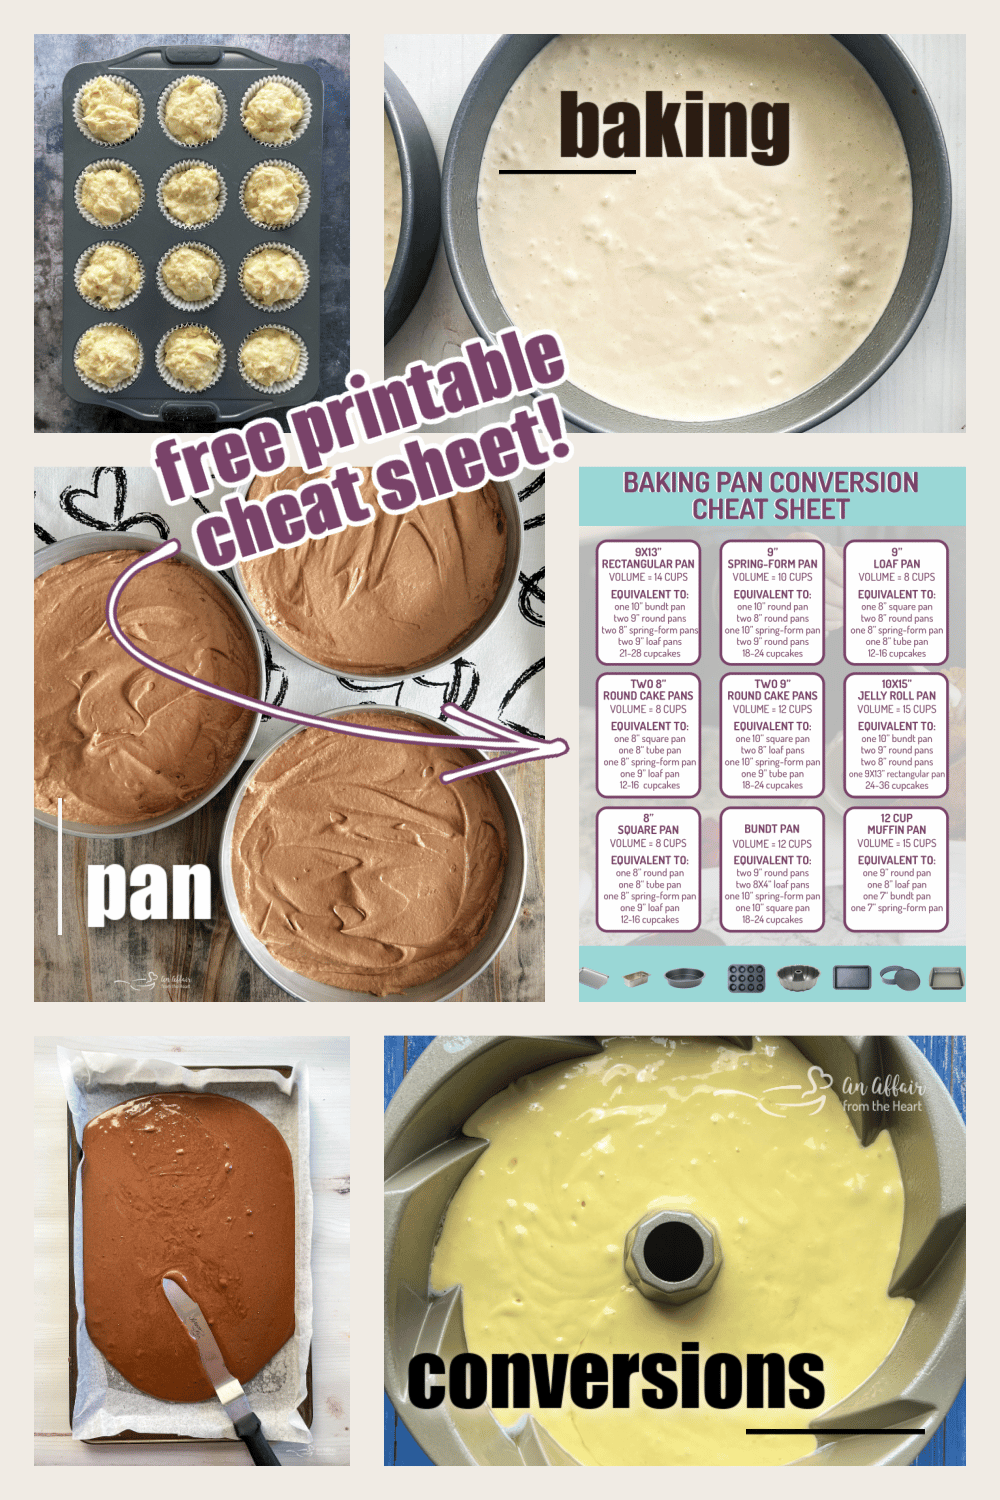 How to Bake Cakes in Springform Pans: 14 Steps (with Pictures)